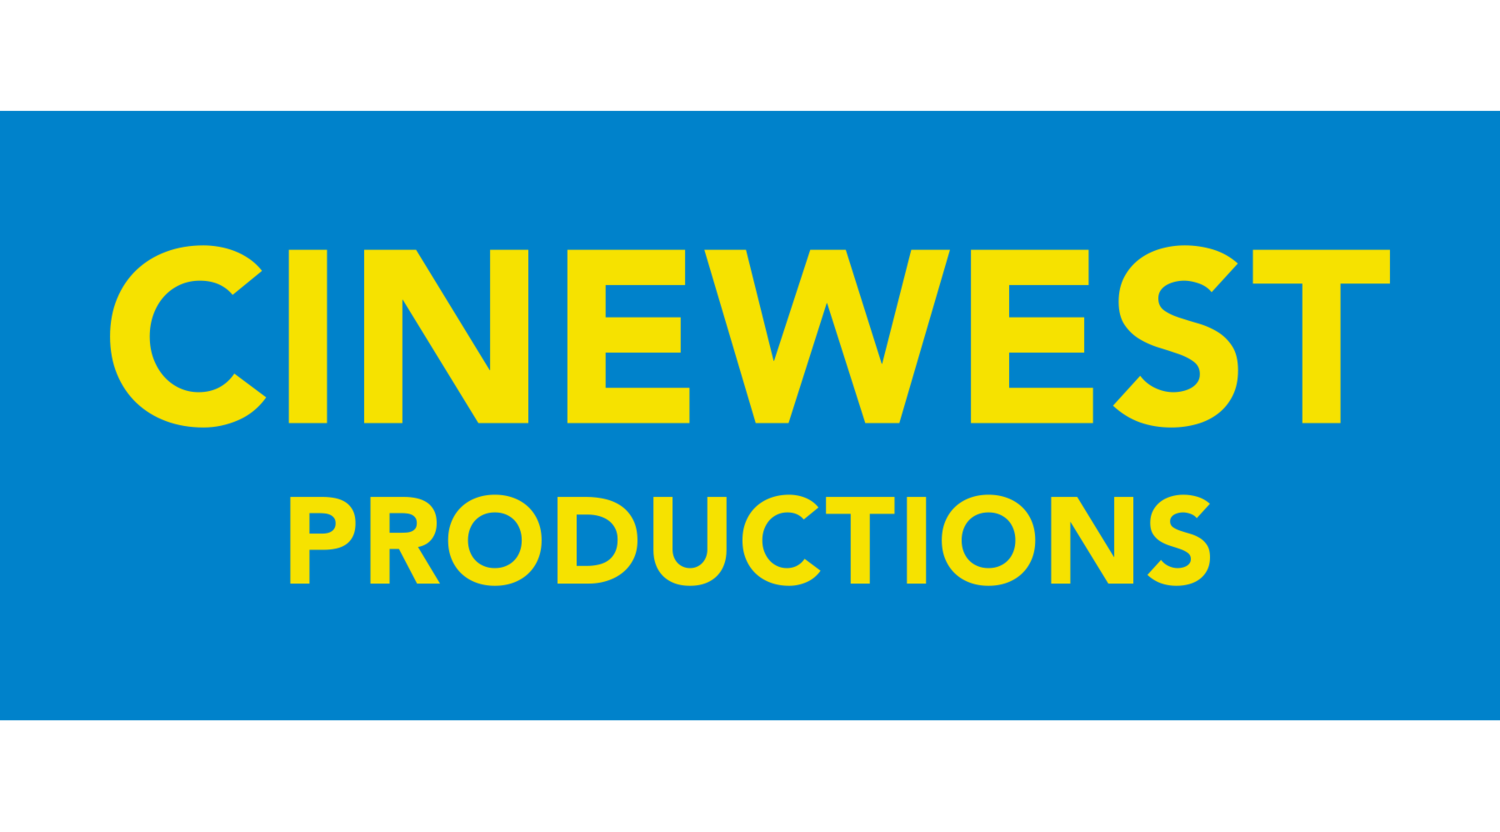 Cinewest Productions